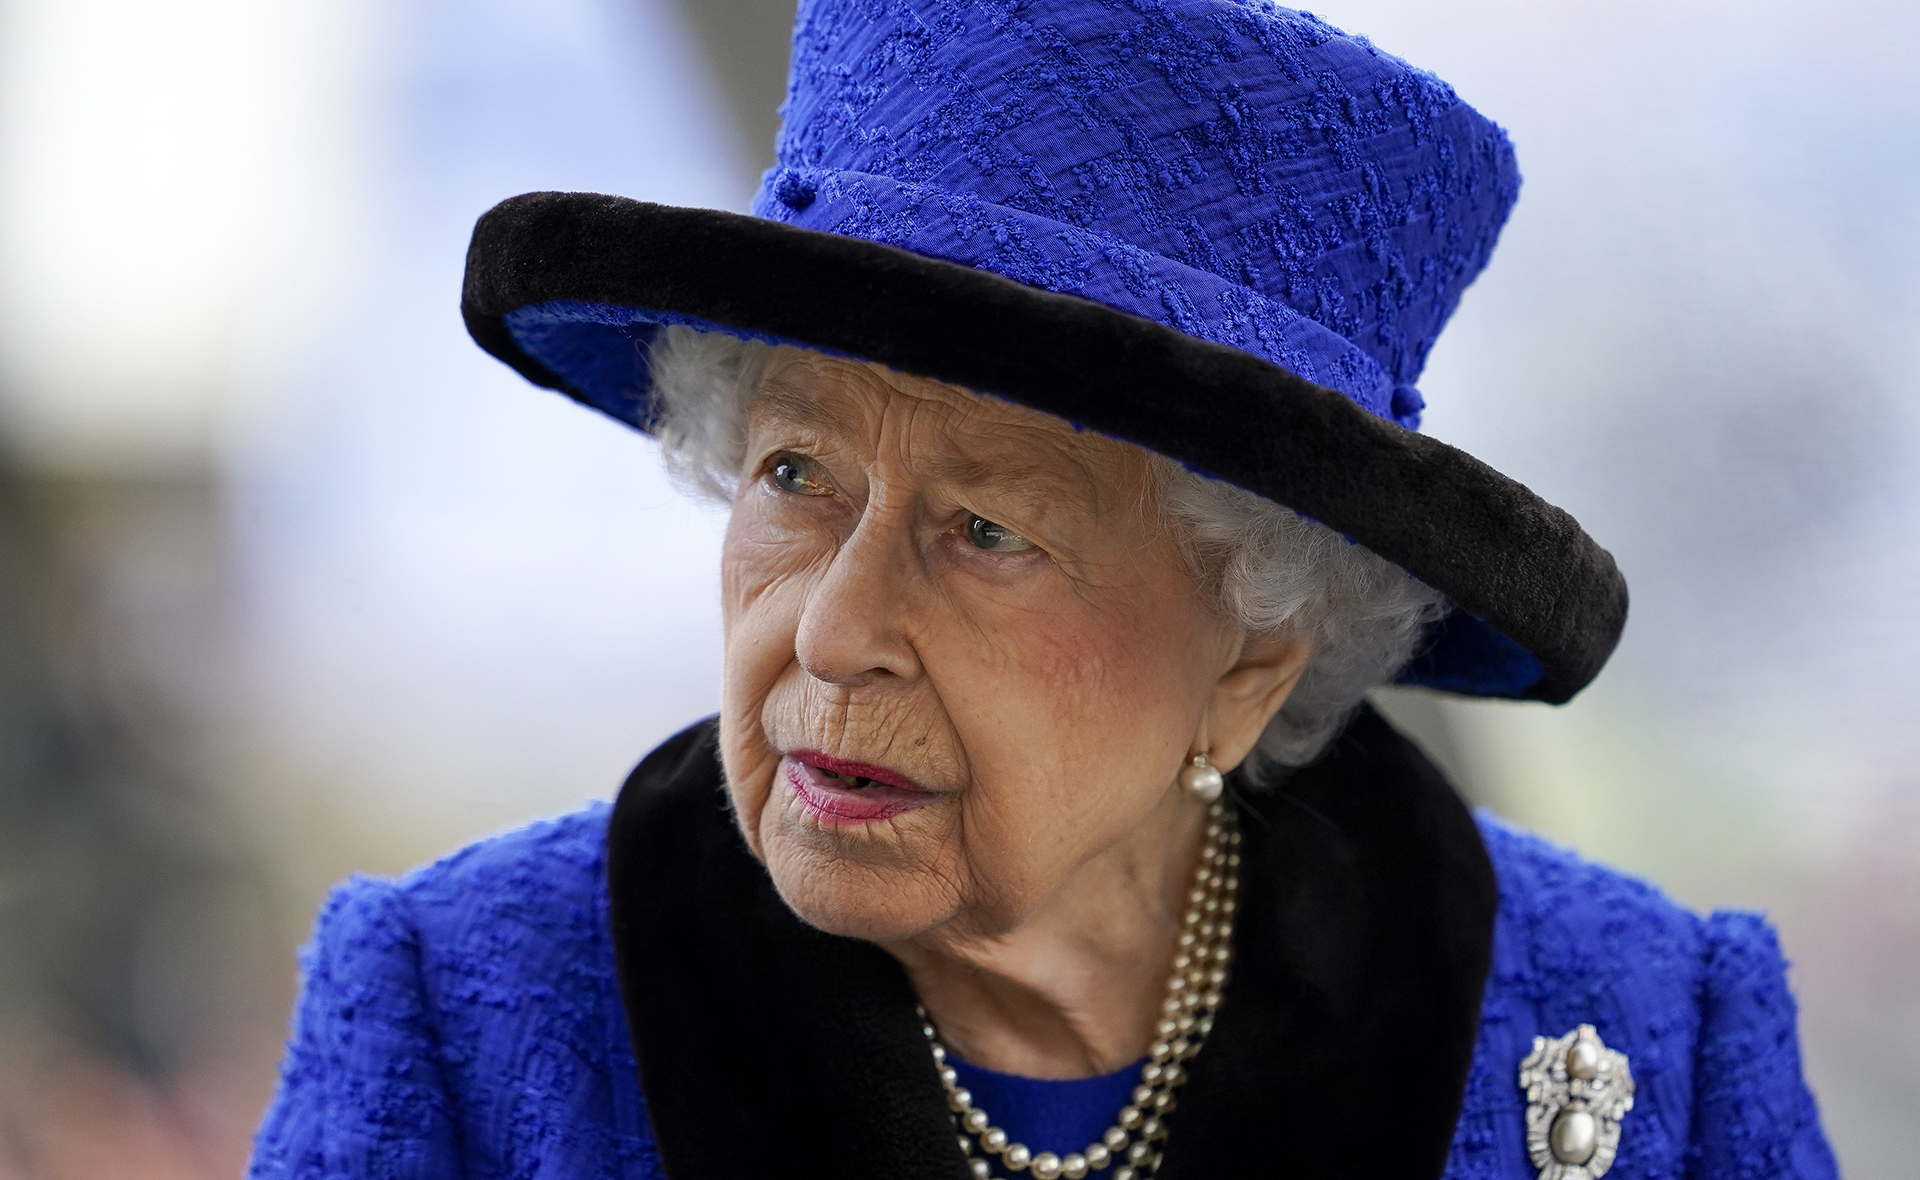 The Queen ‘reluctantly’ cancels trip after doctors order her to rest for a few days, but experts say it’s “no cause for concern”